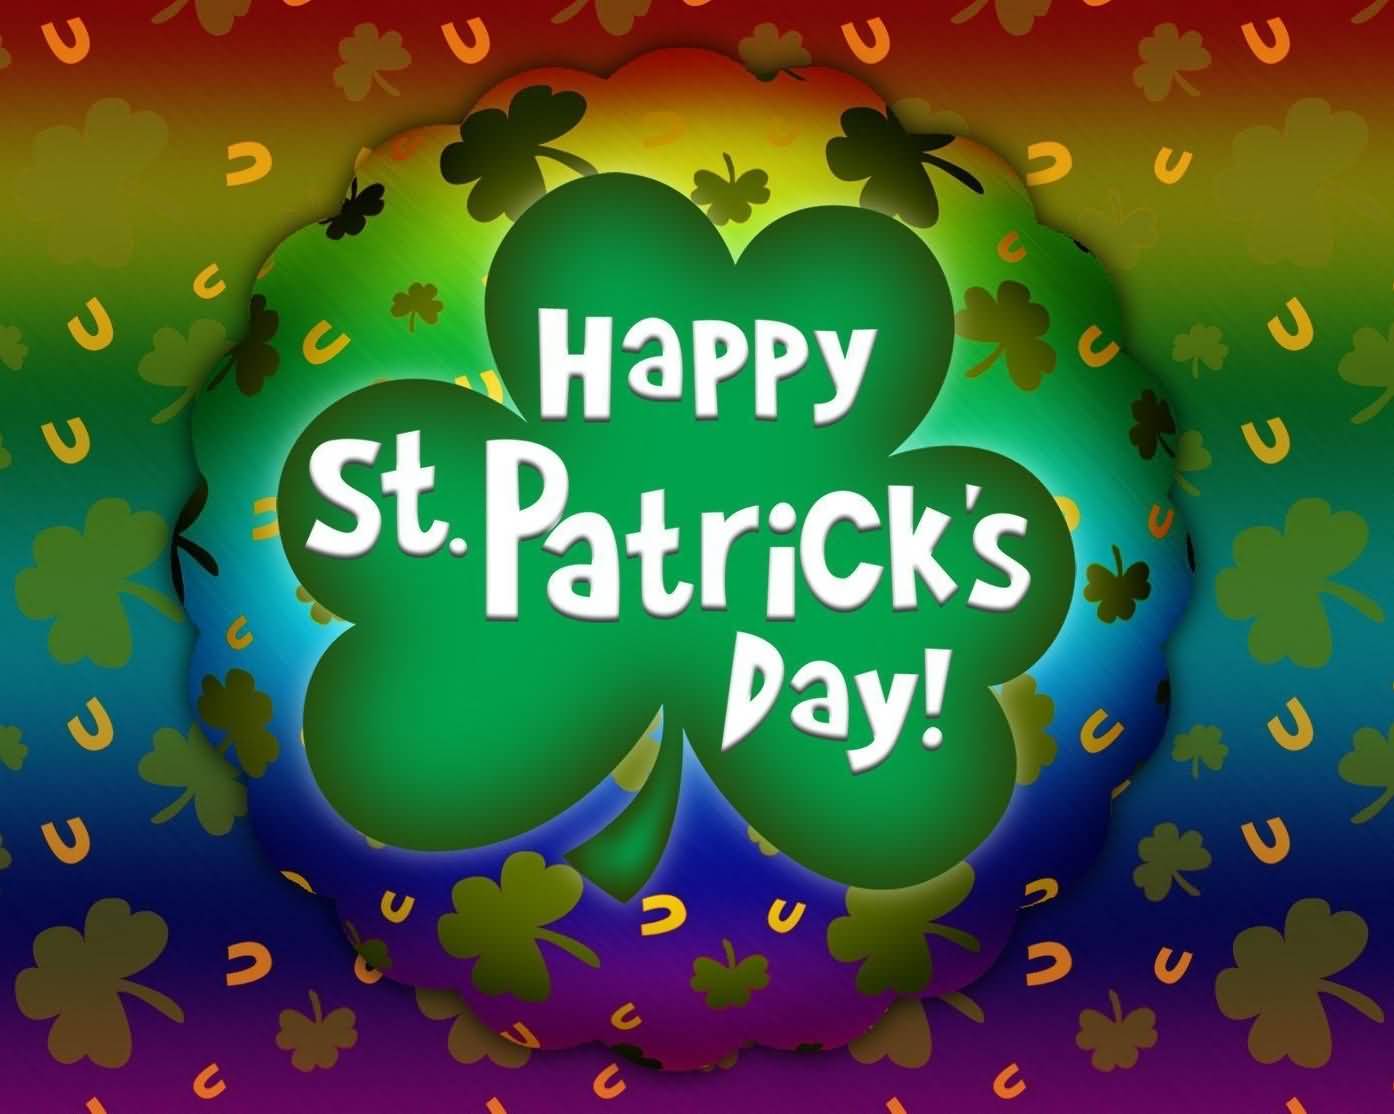 Happy Saint Patrick's Day Clover Leaf Wishes Picture